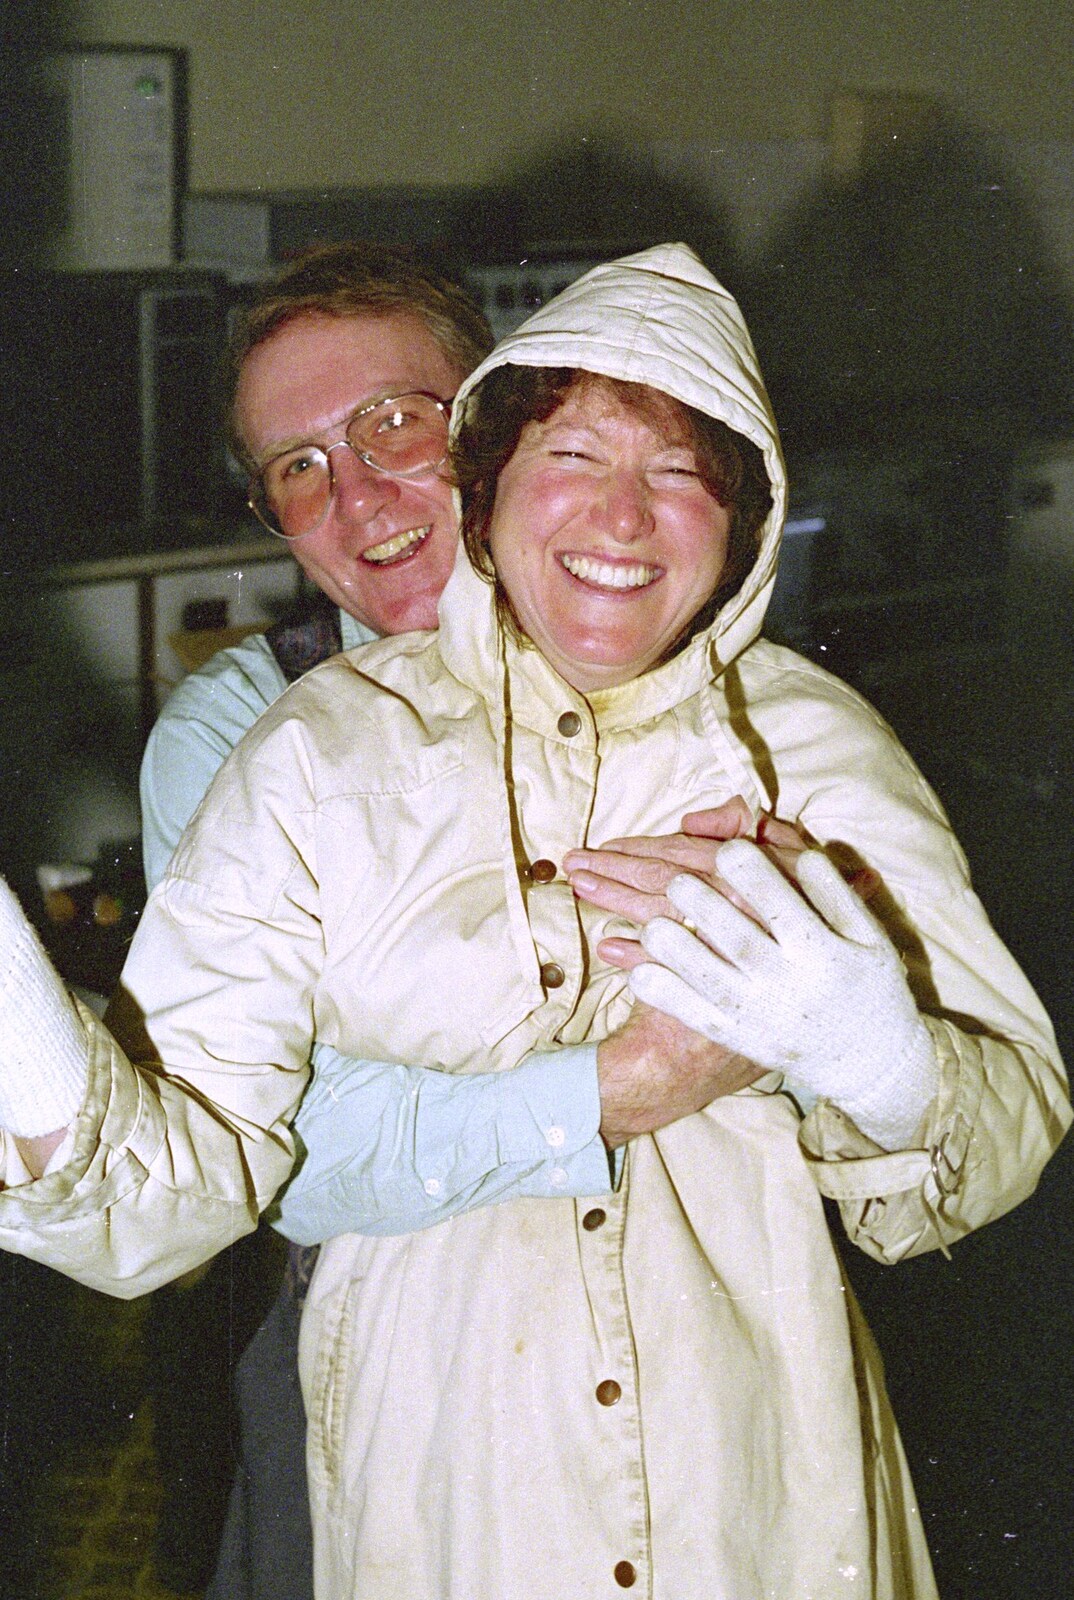 John Willy and Sylvia in the kitchen from New Year's Eve in the Swan Inn, Brome, Suffolk - 31st December 1995